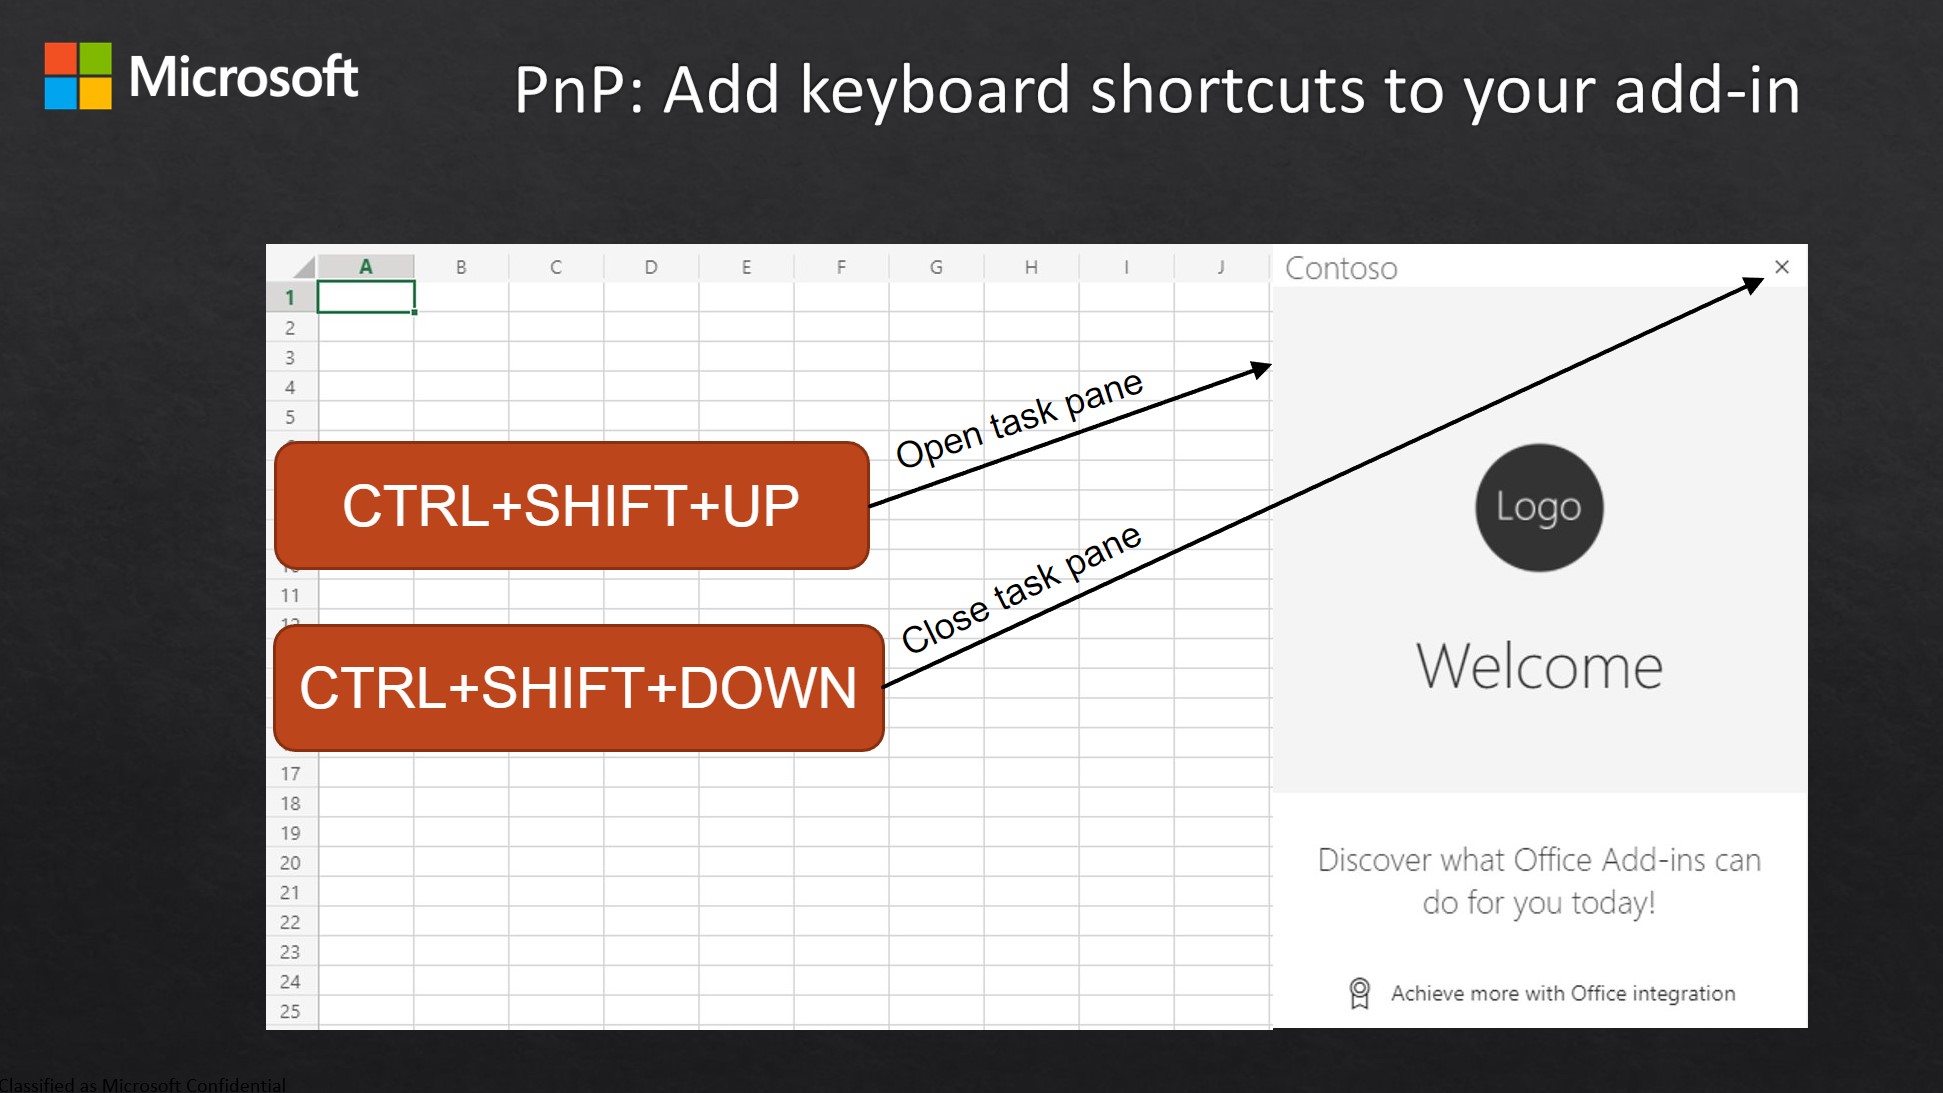 Screen shot of Excel showing the use of CTRL+SHIFT+UP to open the task pane, and CTRL+SHIFT+DOWN to close the task pane.